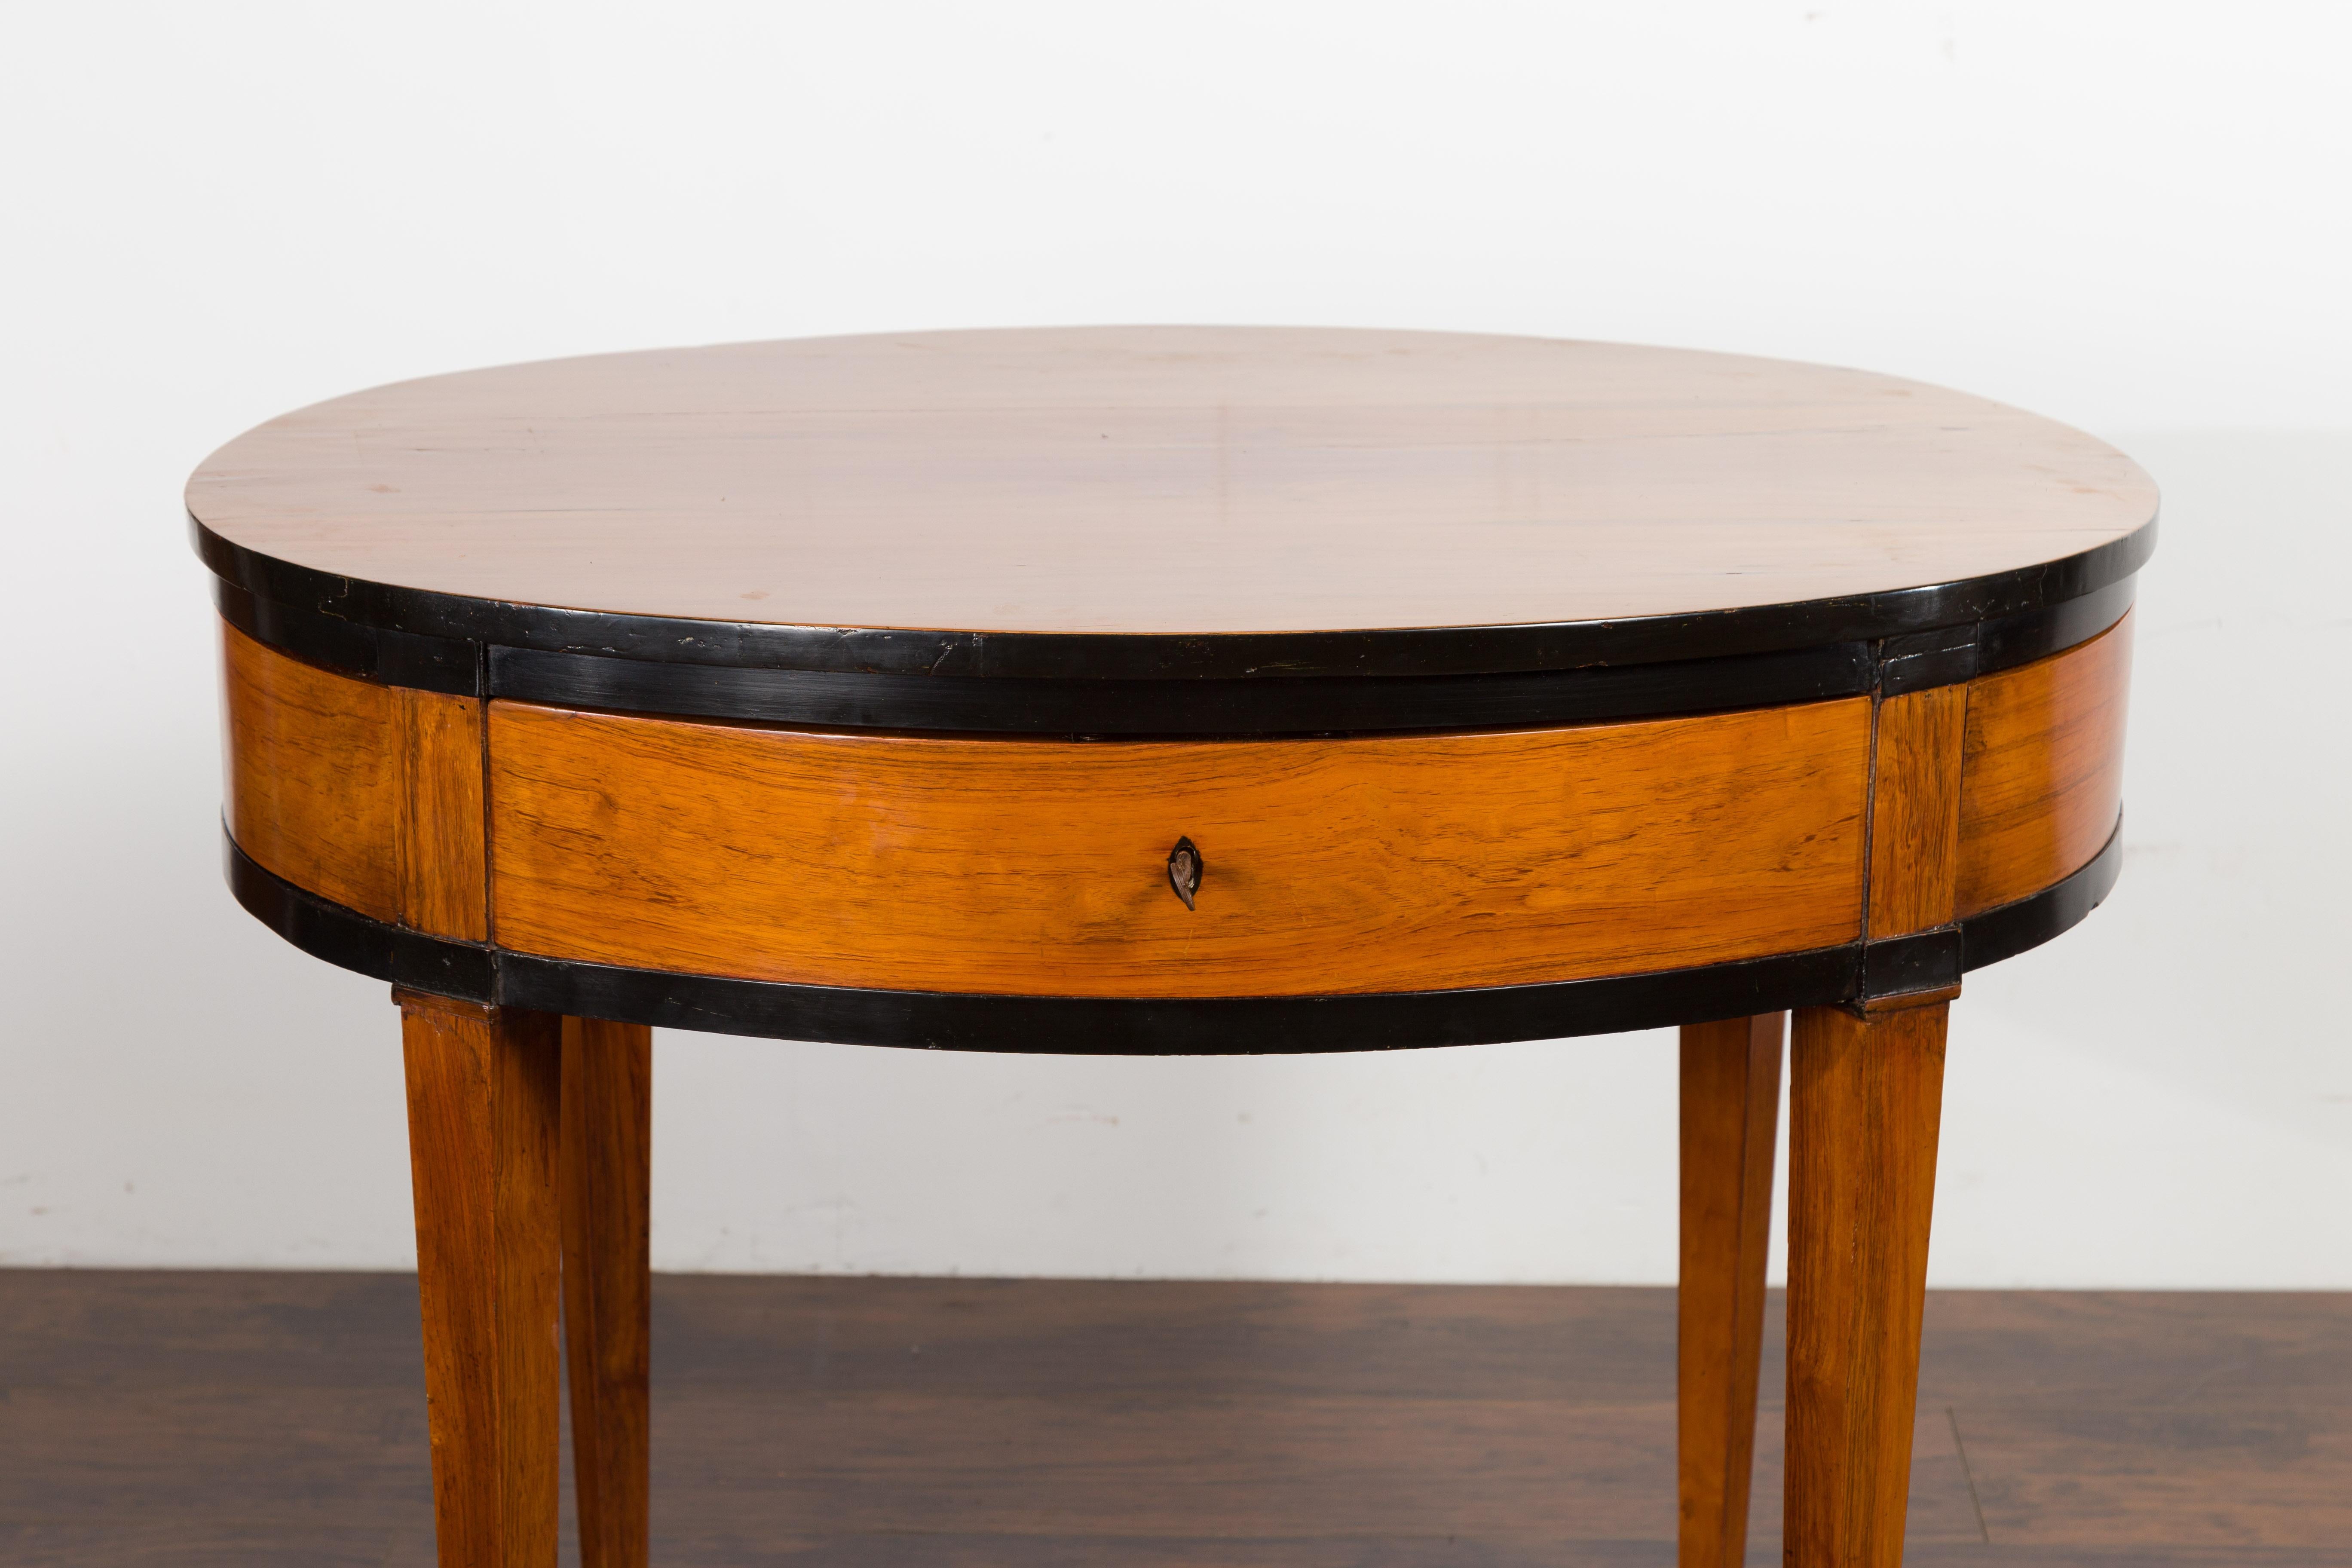 Austrian 1840s Biedermeier Oval Top Table with Drawer and Ebonized Accents 2